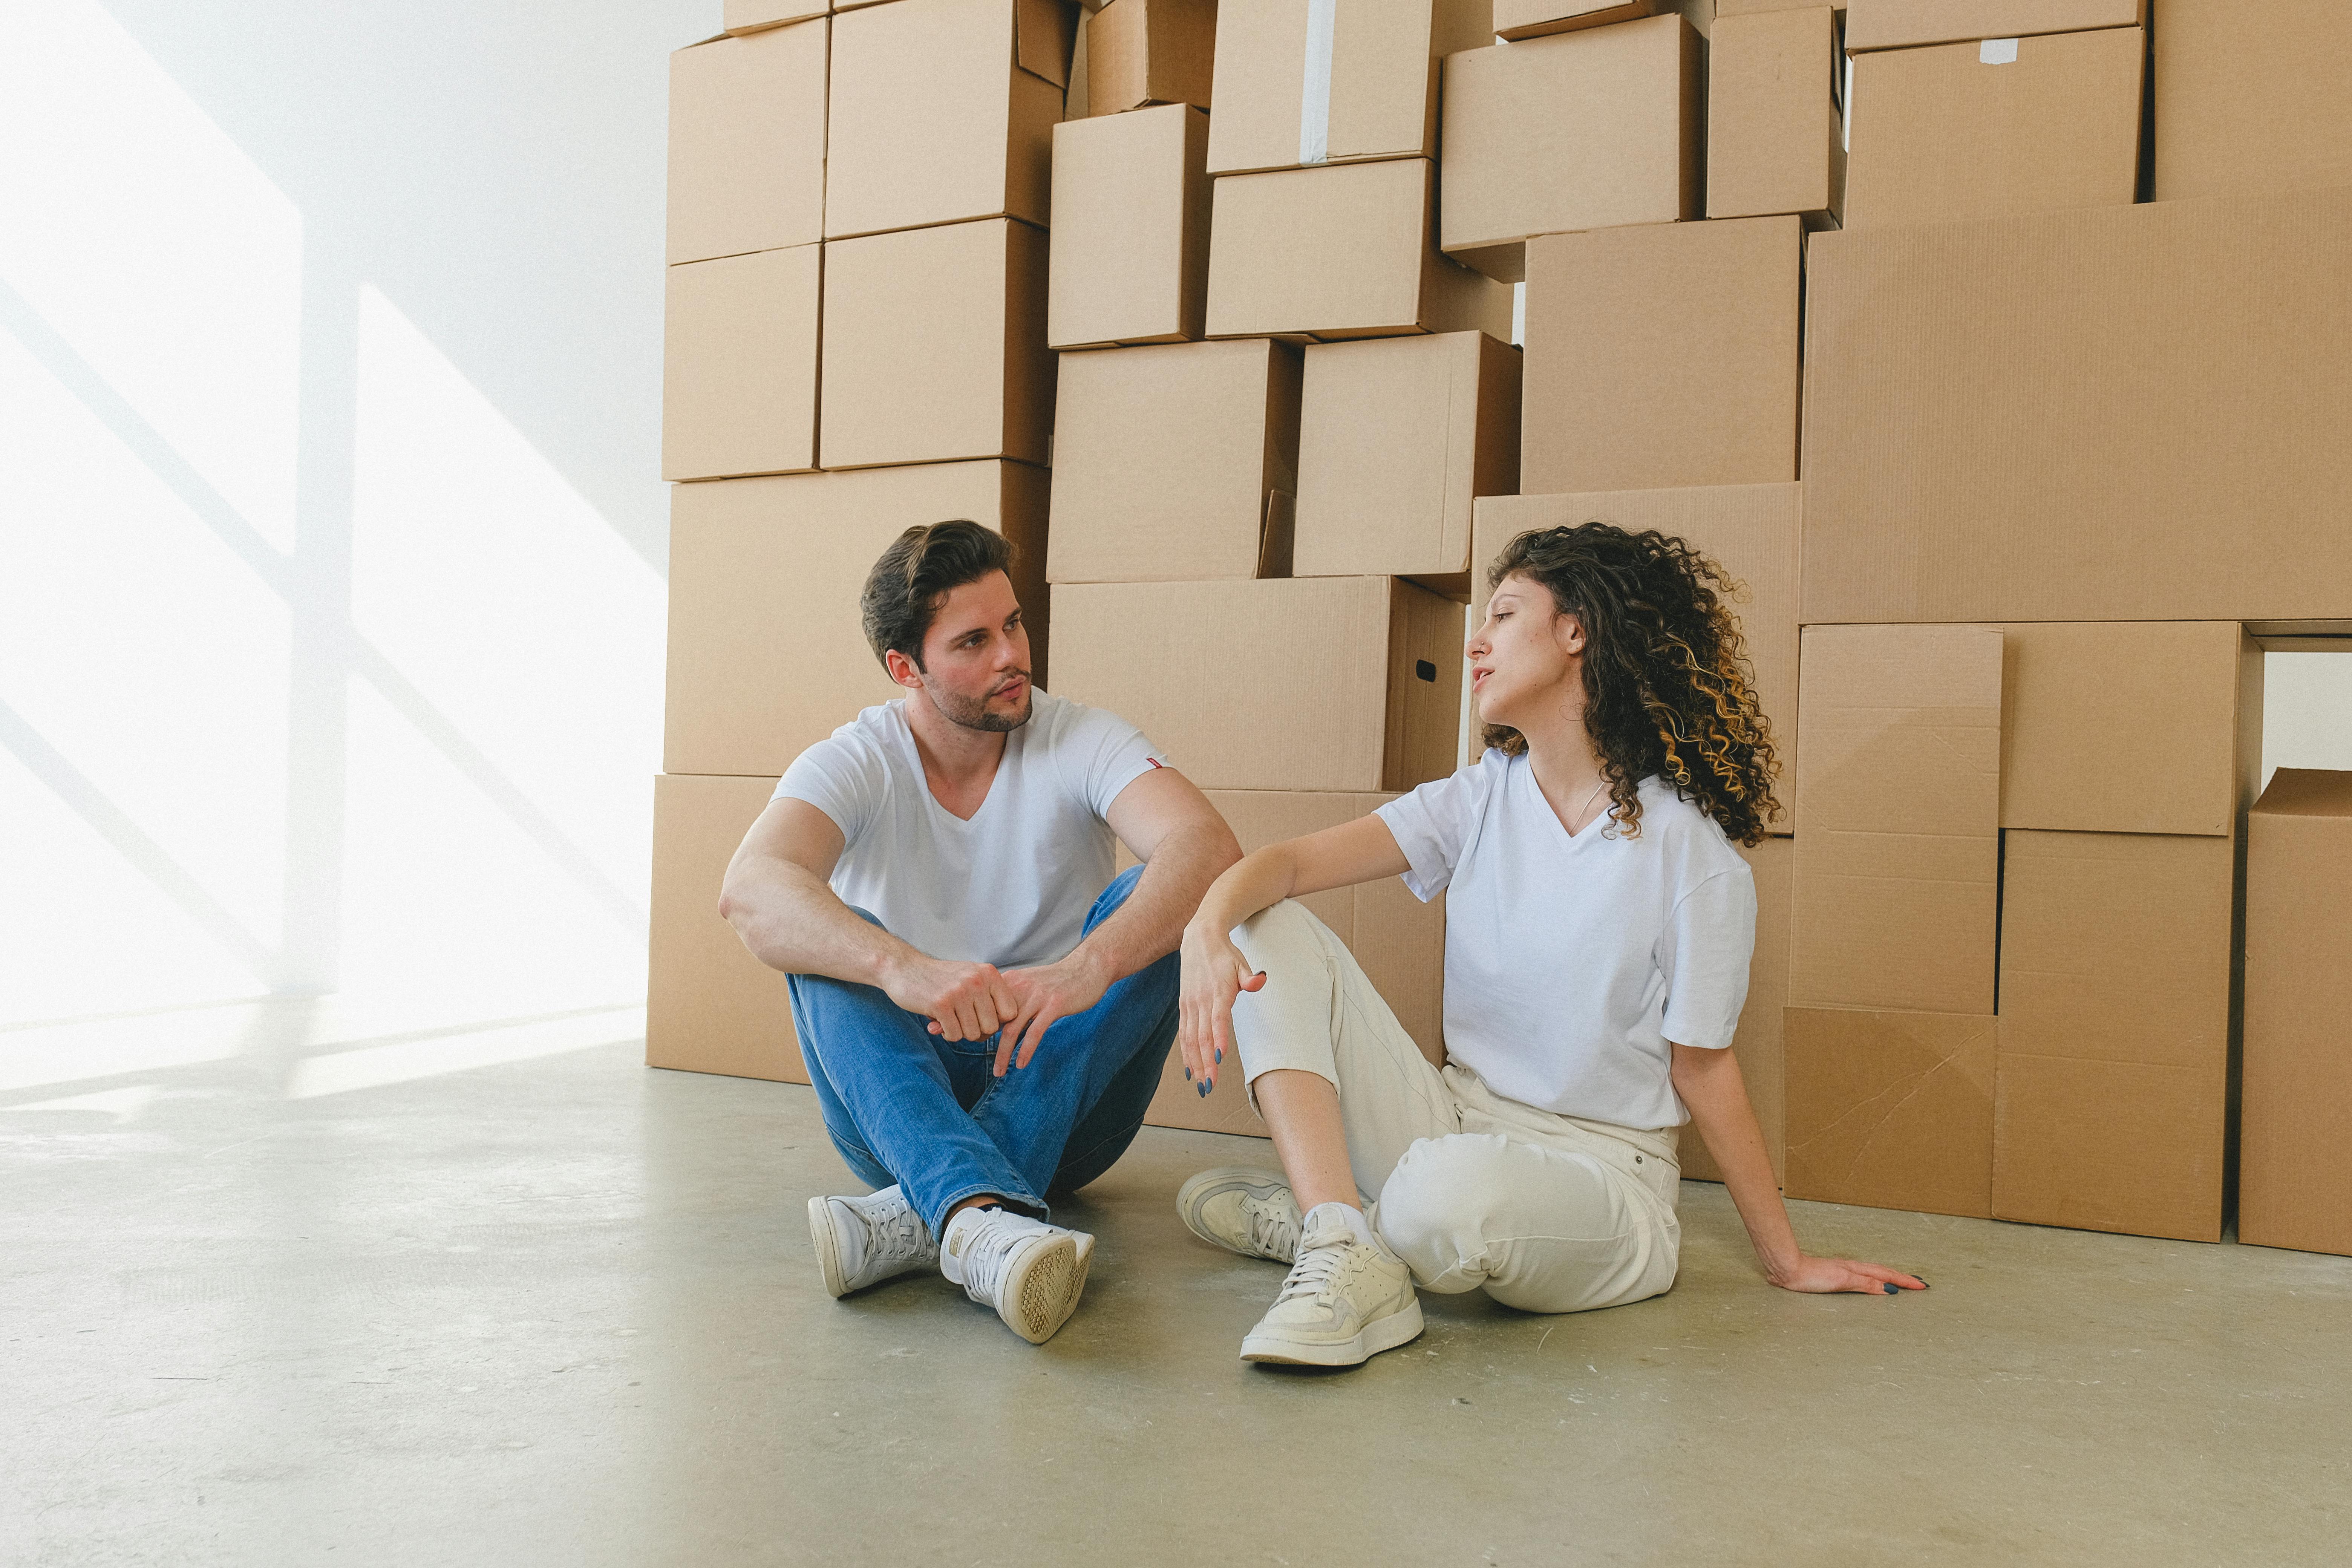 couple conversing against heaps of boxes during relocation